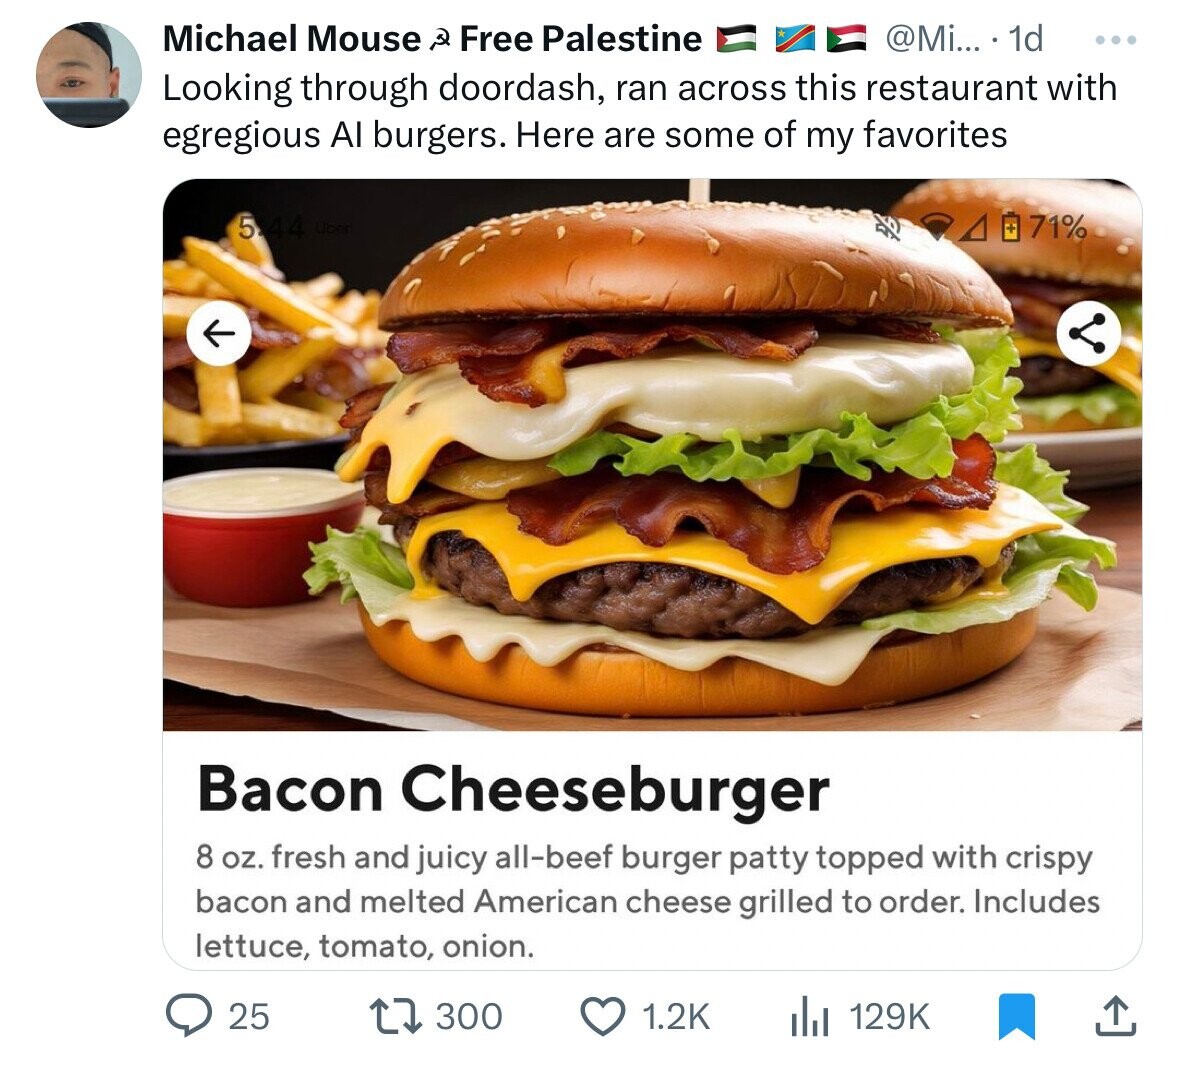 cheeseburger - Michael Mouse Free Palestine . ... 1d Looking through doordash, ran across this restaurant with egregious Al burgers. Here are some of my favorites K 5.44 Uber 4071% il ... Bacon Cheeseburger 8 oz. fresh and juicy allbeef burger patty toppe